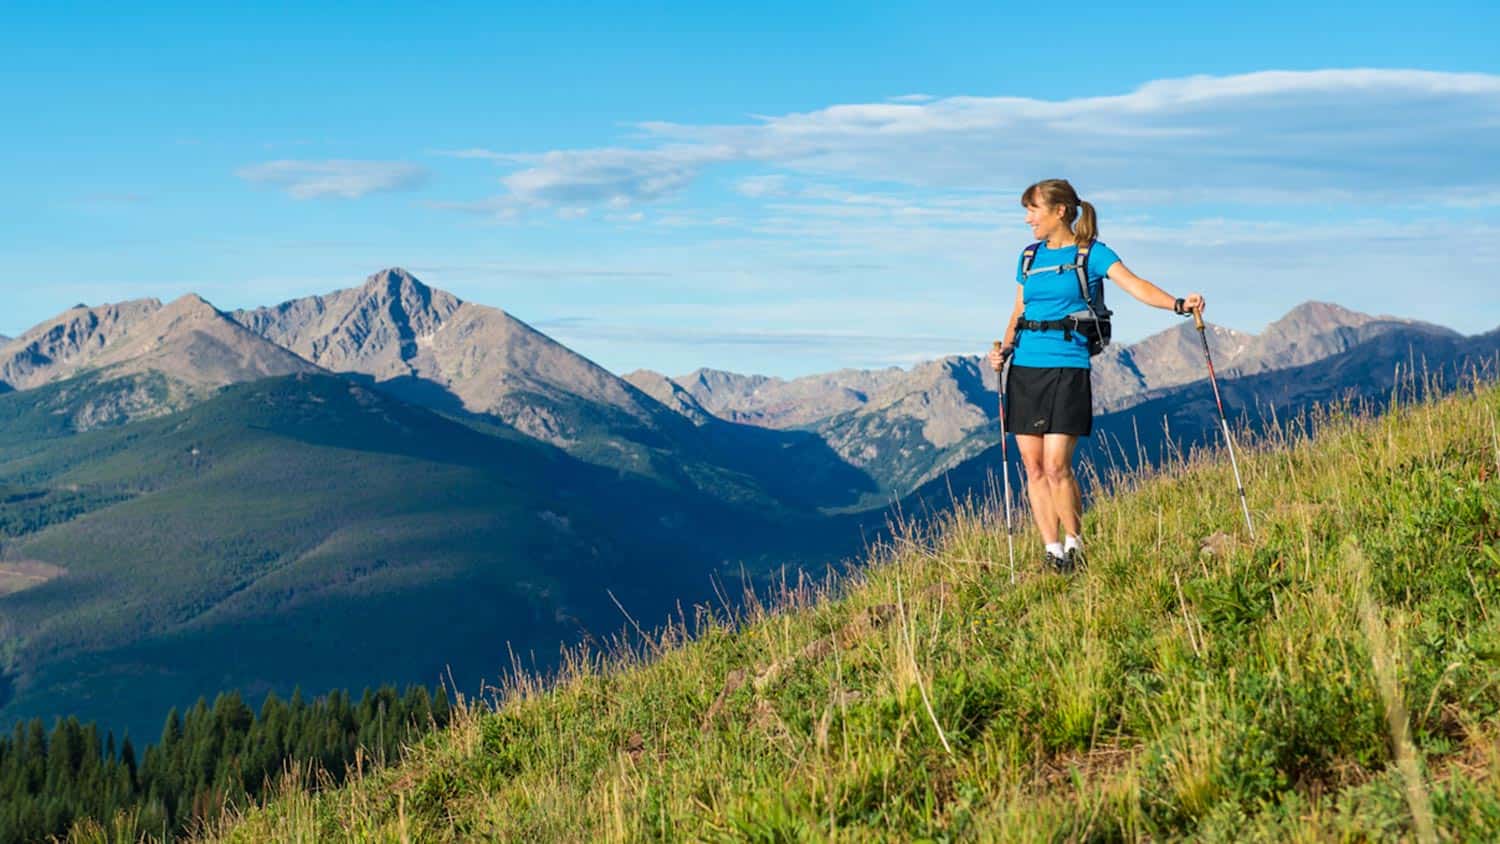 Woman hiking outdoors, holding poles, looking over at valley and mountains in the distance